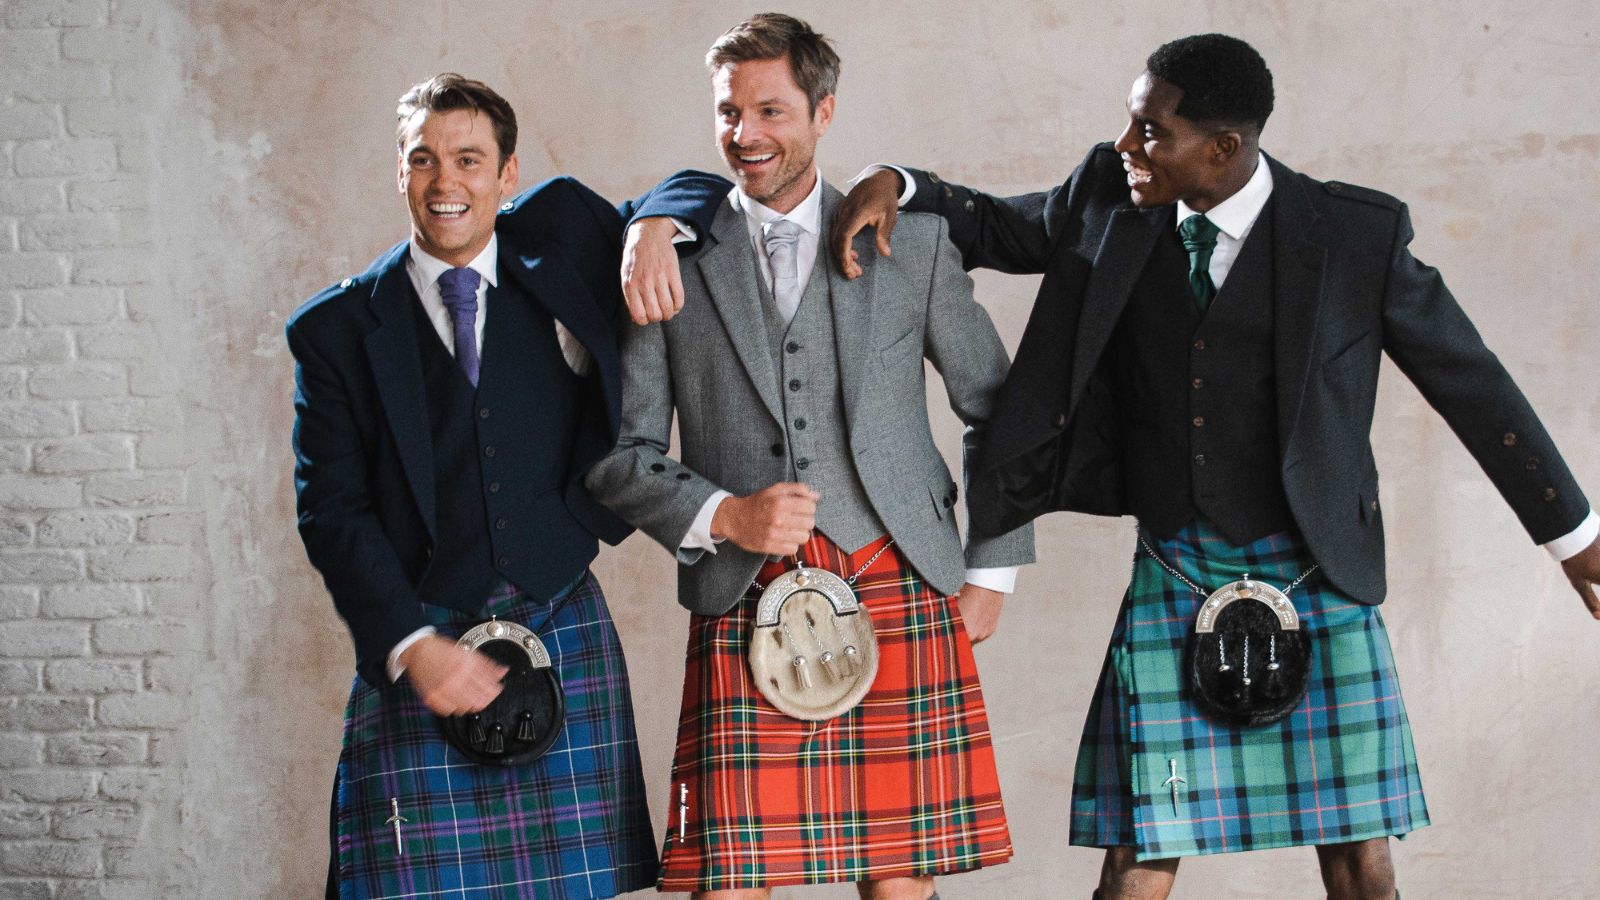 Highland Dress Guide: The History & Attire